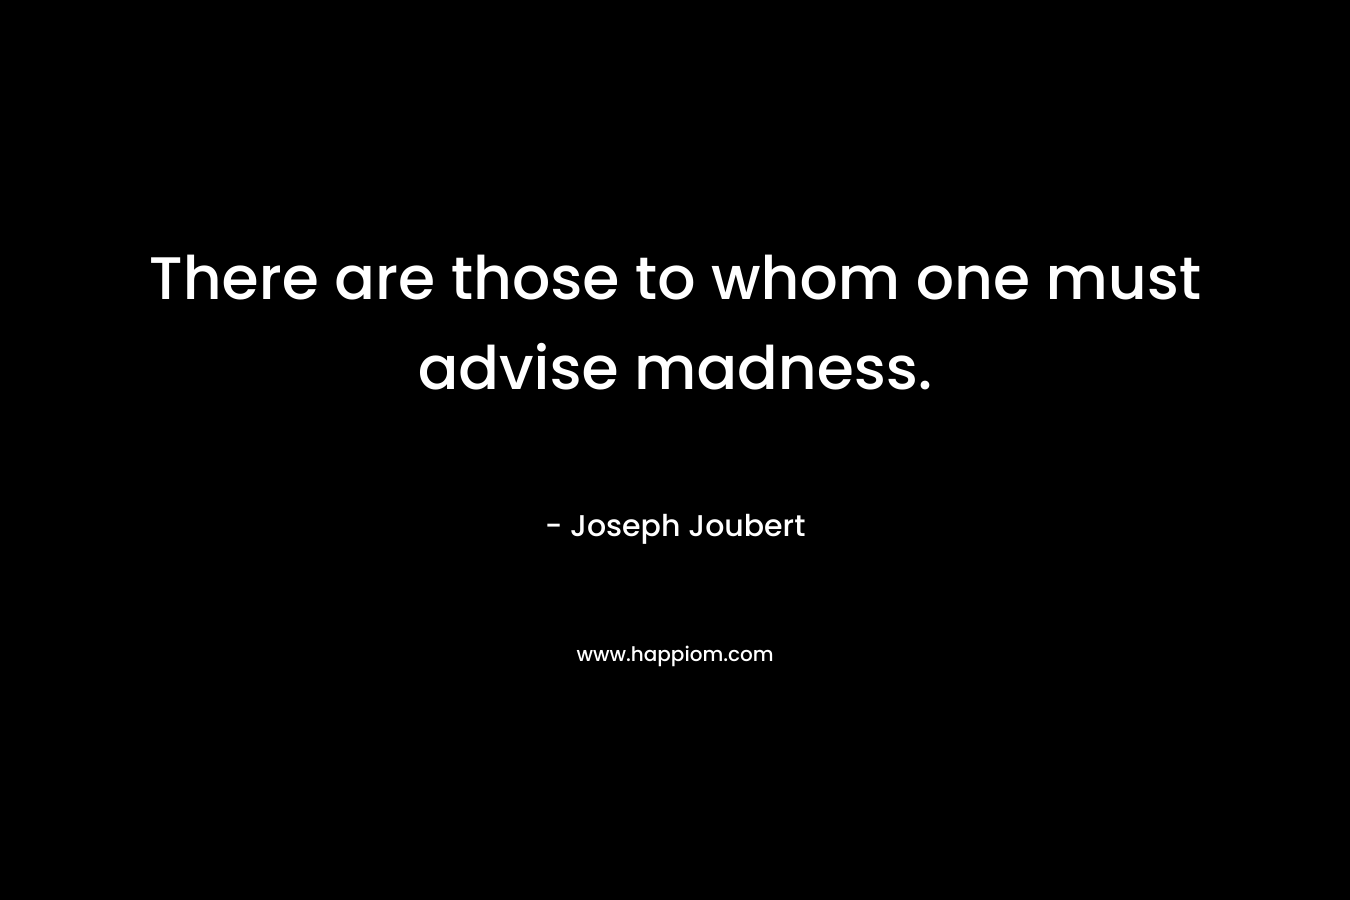 There are those to whom one must advise madness. – Joseph Joubert